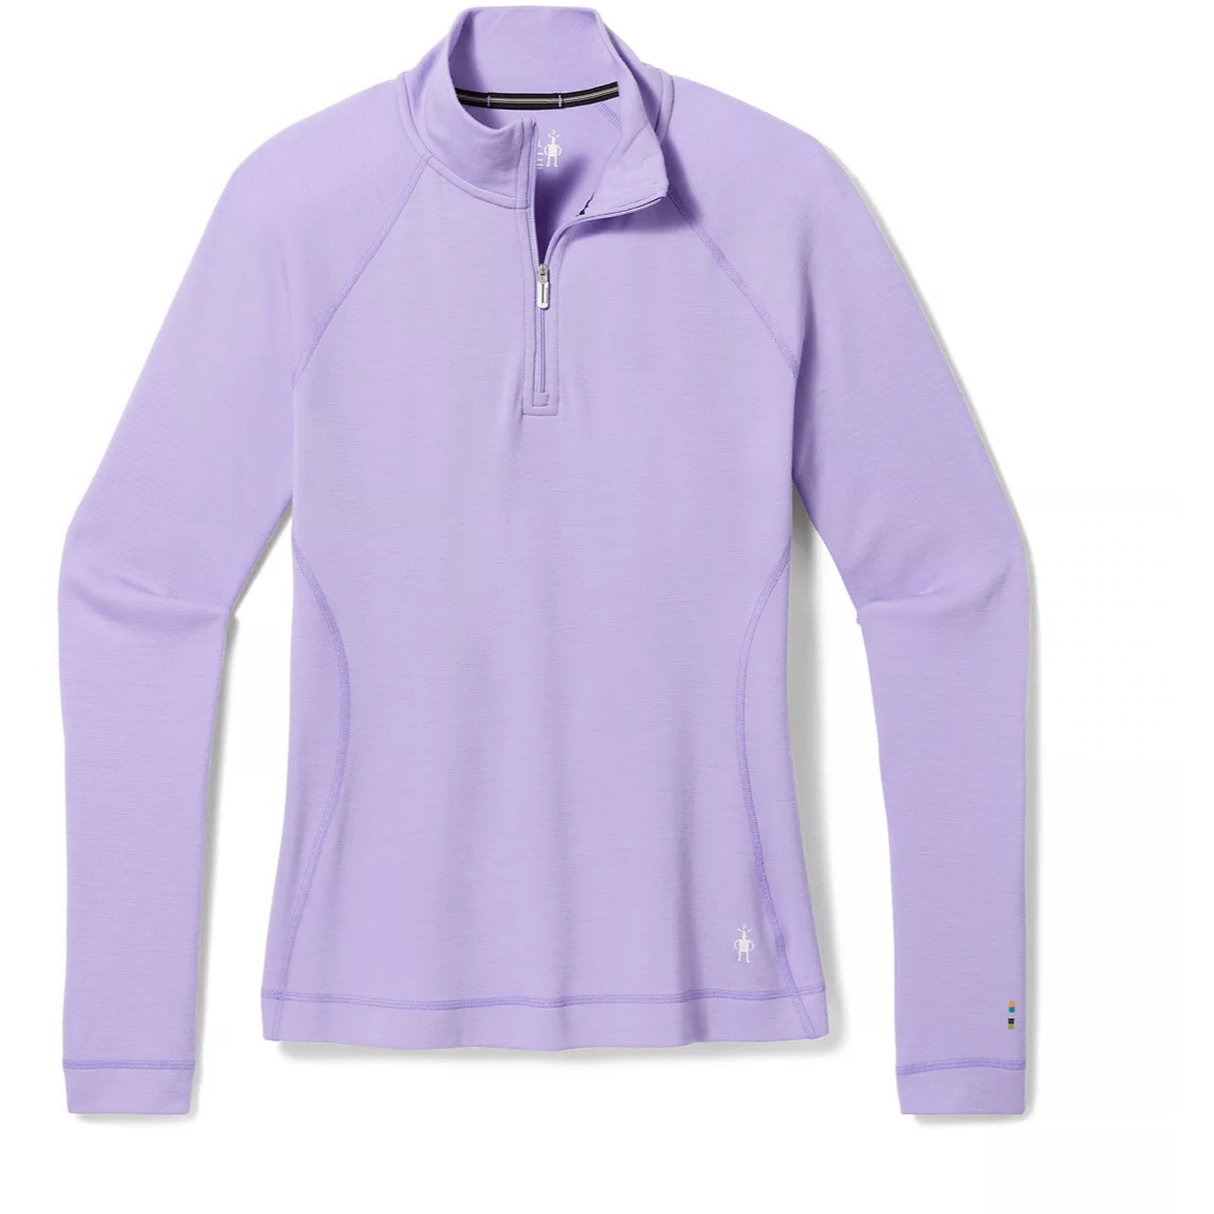 Smartwool Womens Classic Thermal Merino Base Layer 1/4 Zip  -  Small / Ultra Violet